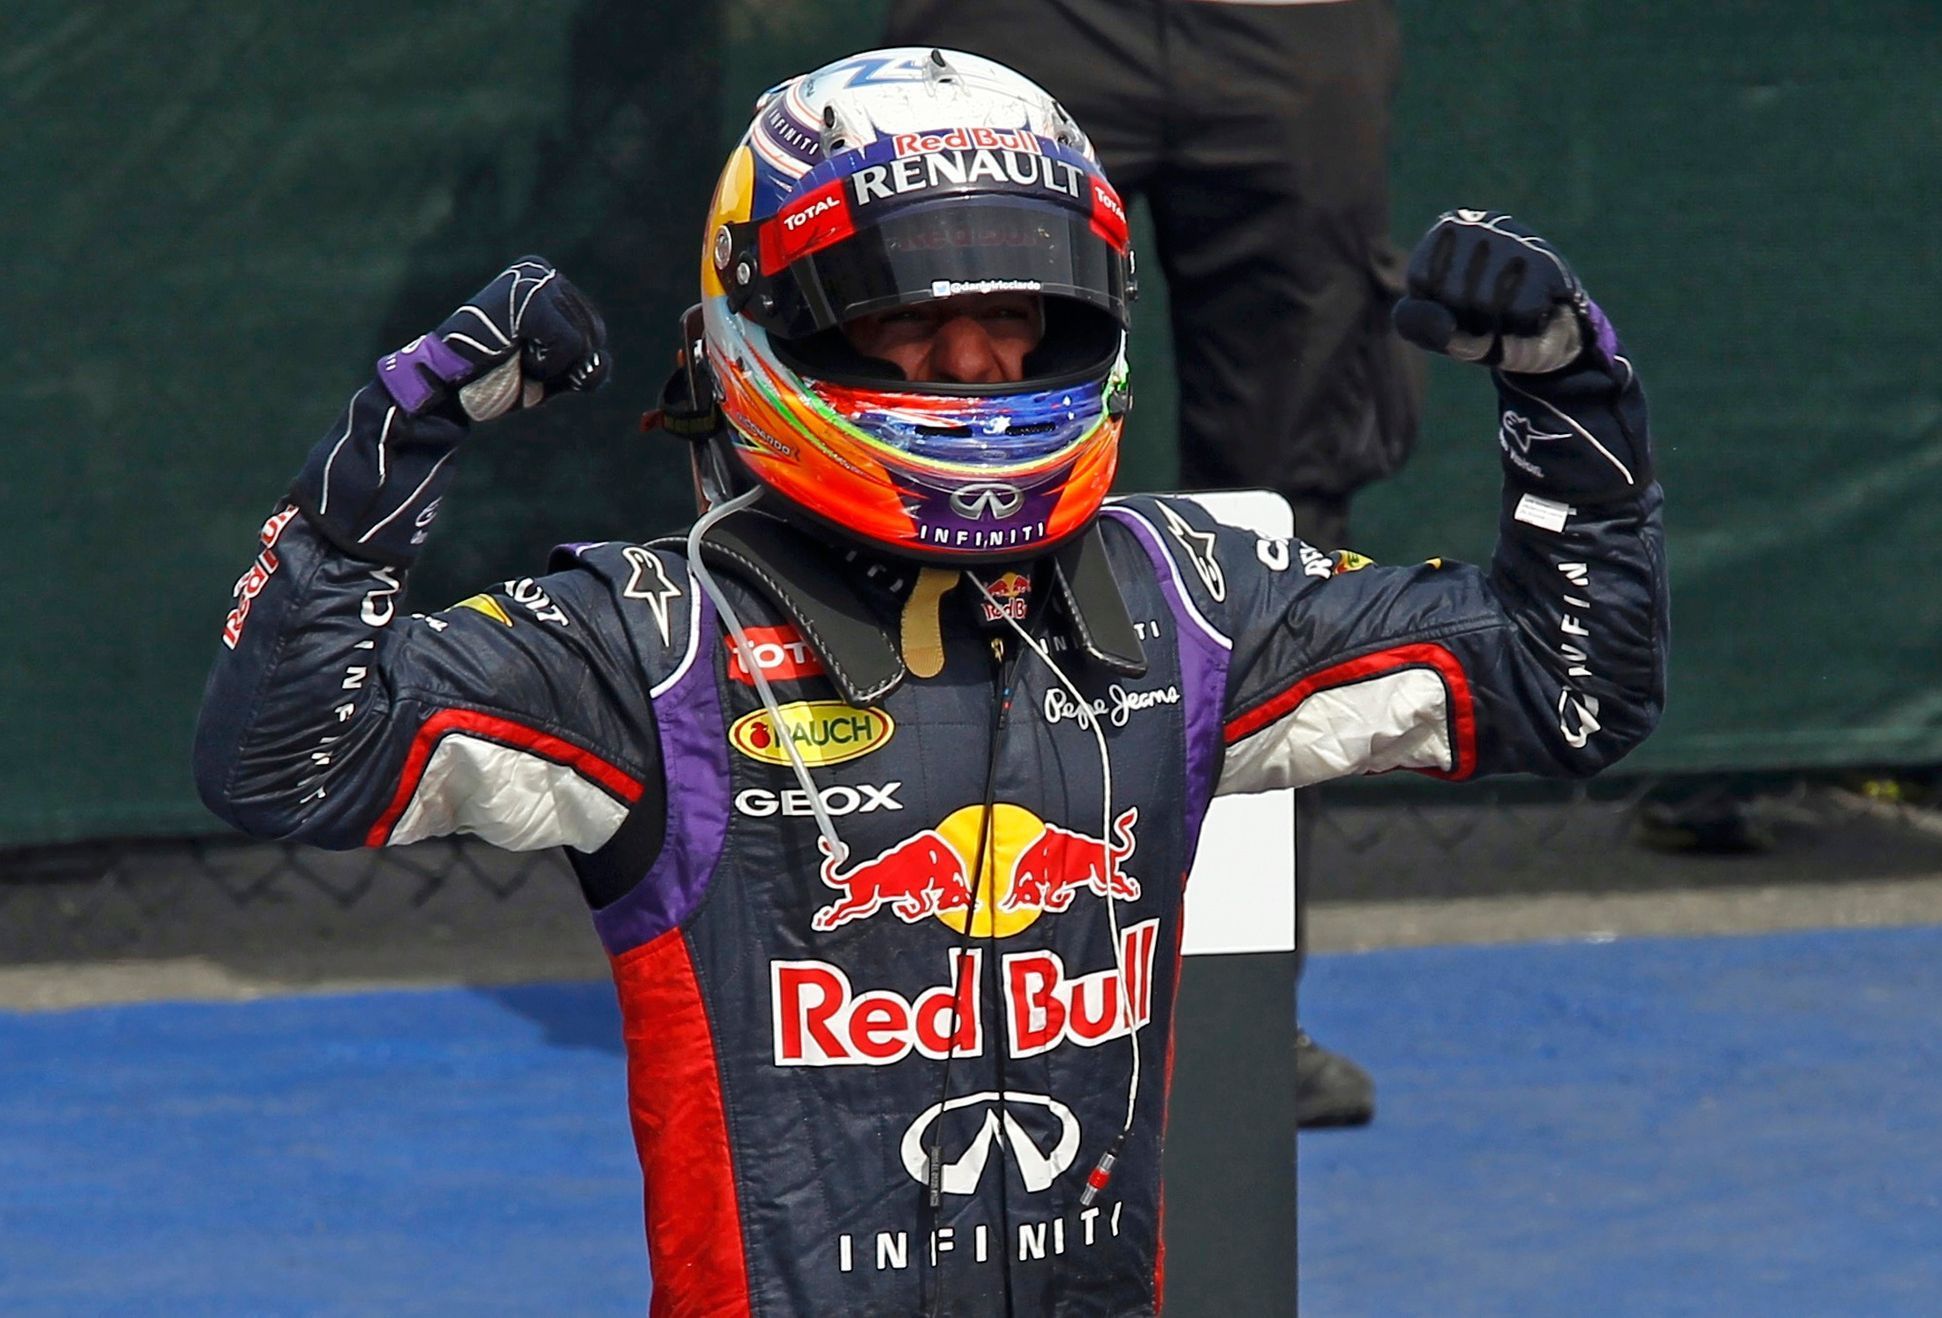 Red Bull Formula One driver Ricciardo of Australia celebrates after winning the Canadian F1 Grand Prix at the Circuit Gilles Villeneuve in Montreal